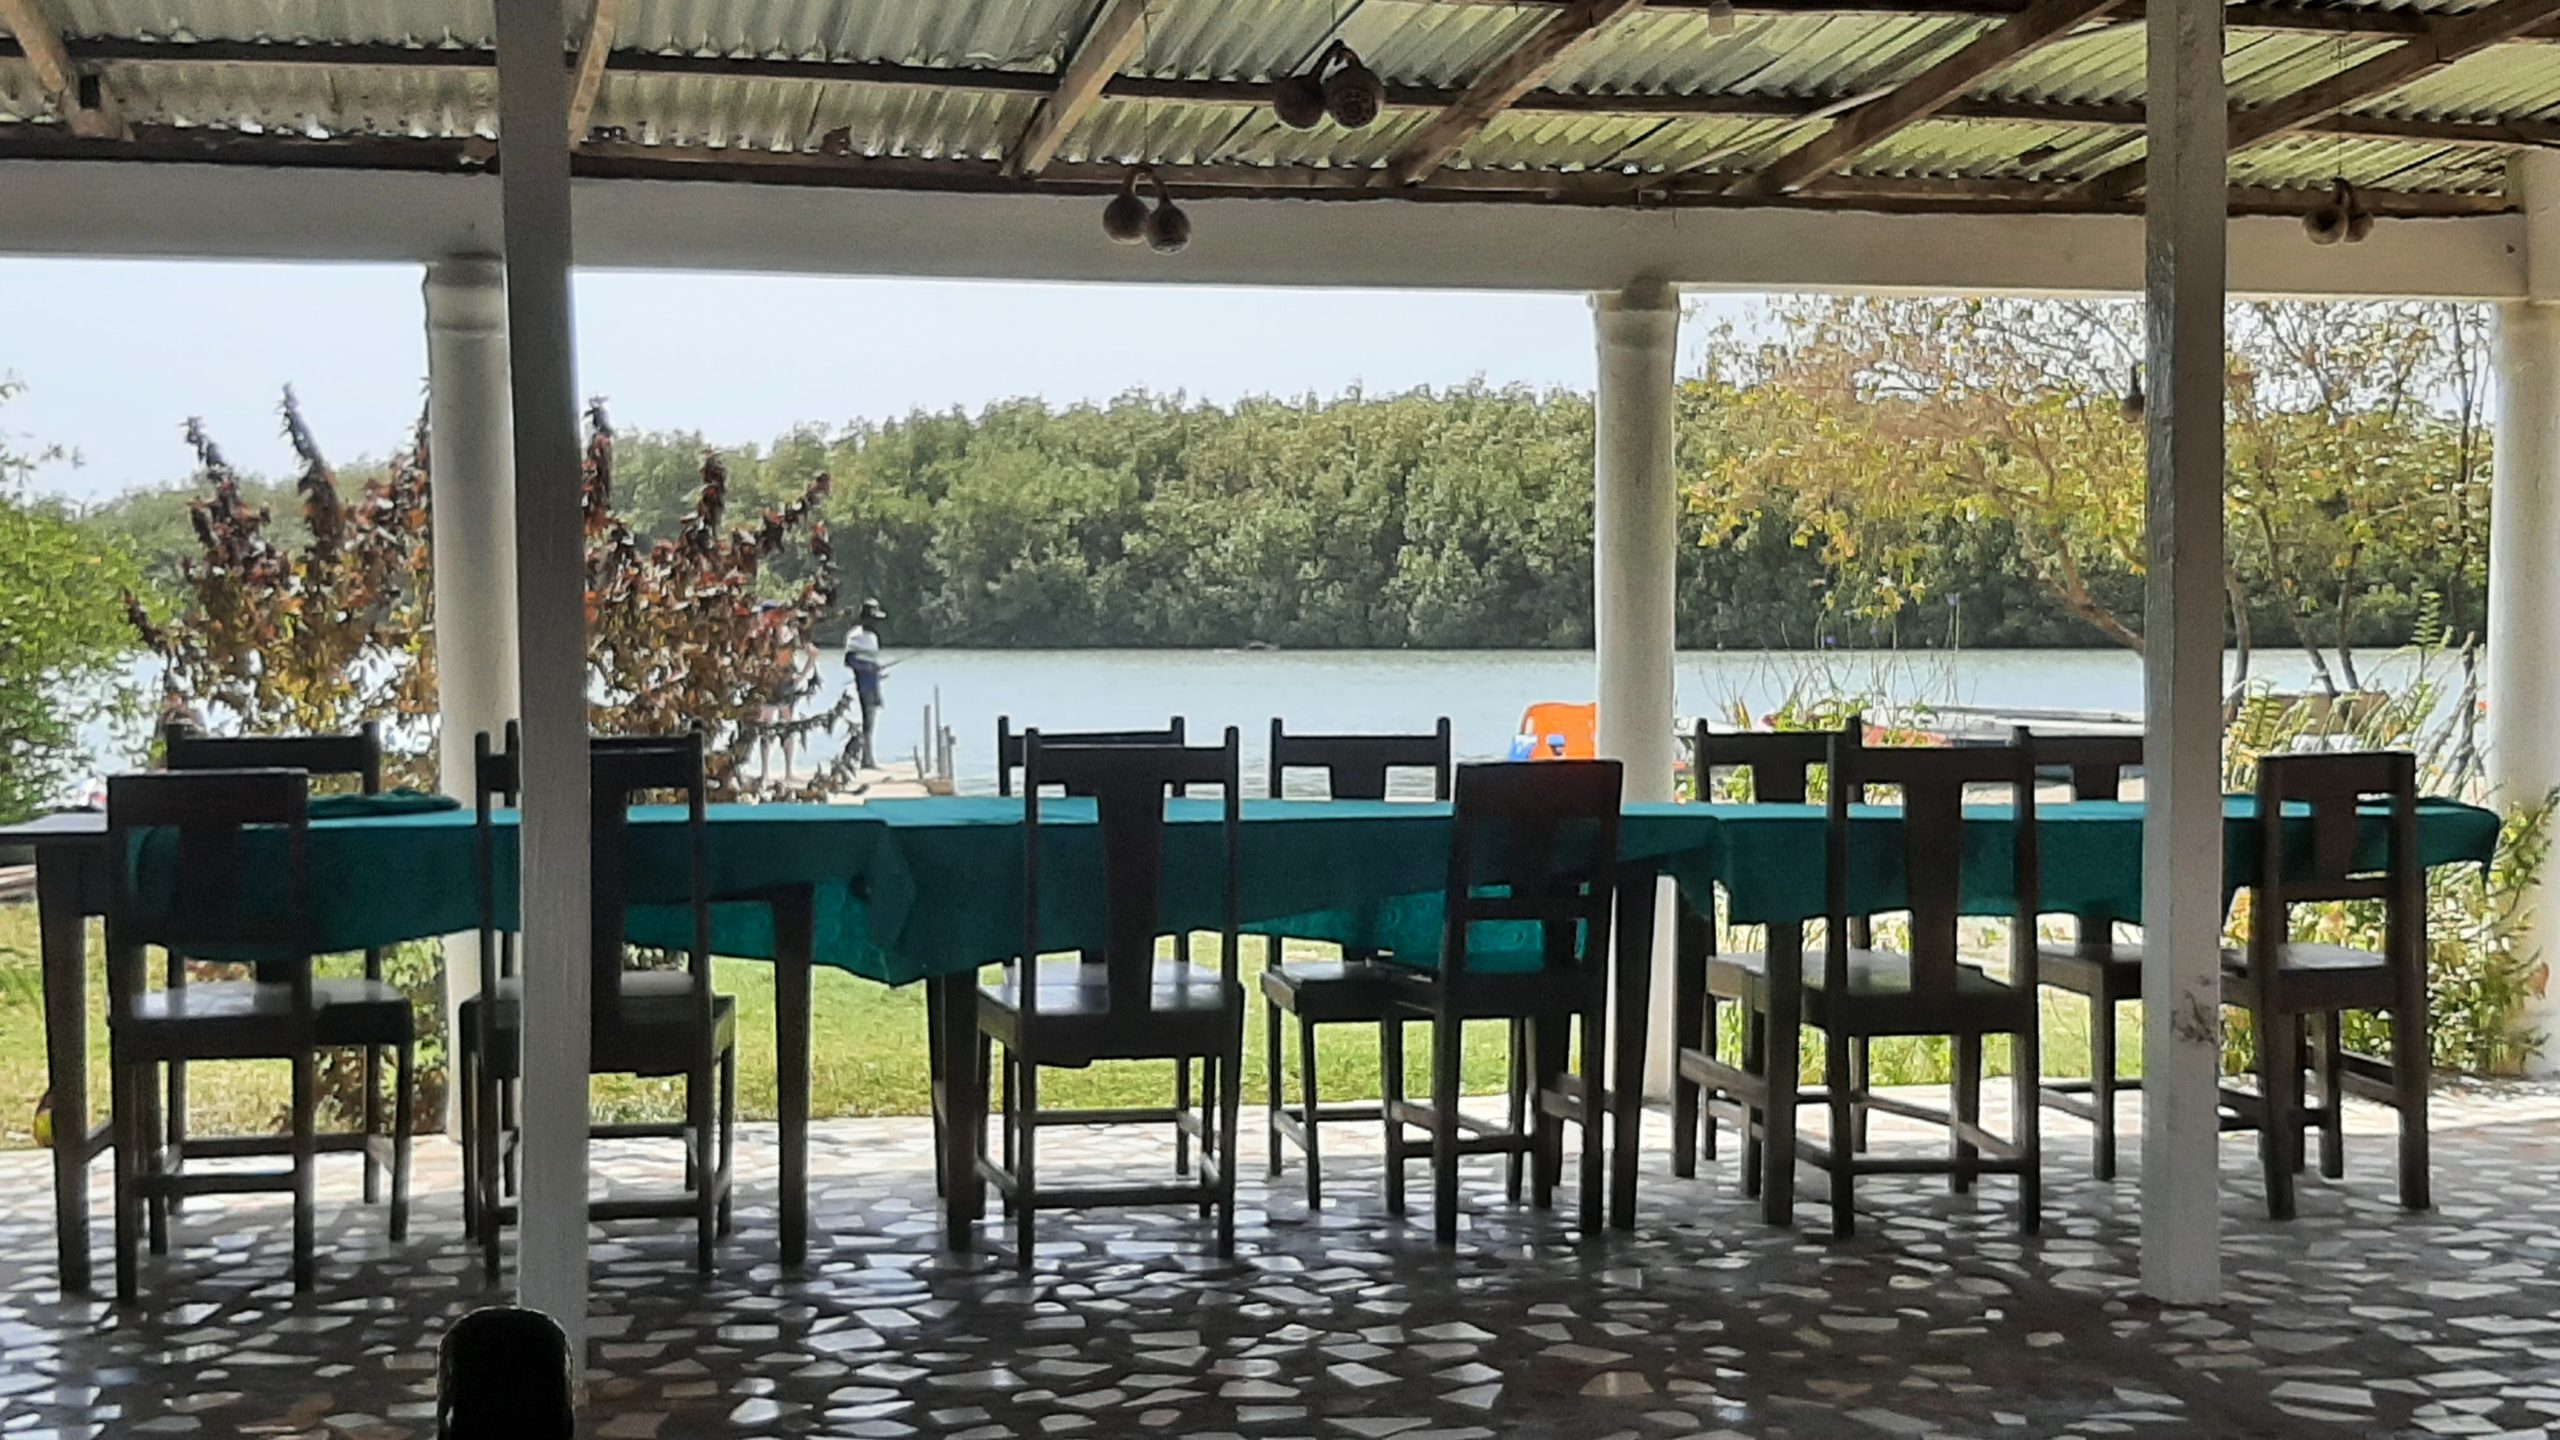 StalaRestaurantRiver scaled - THE GAMBIA: IN THE RIVER DELTA OF THE IDYLLIC ALLAHEIN-RIVER AND DIRECTLY ON THE ATLANTIC: THE STALA ADVENTURE LODGE BECKONS WITH 'PETS ❤️-WELCOME'